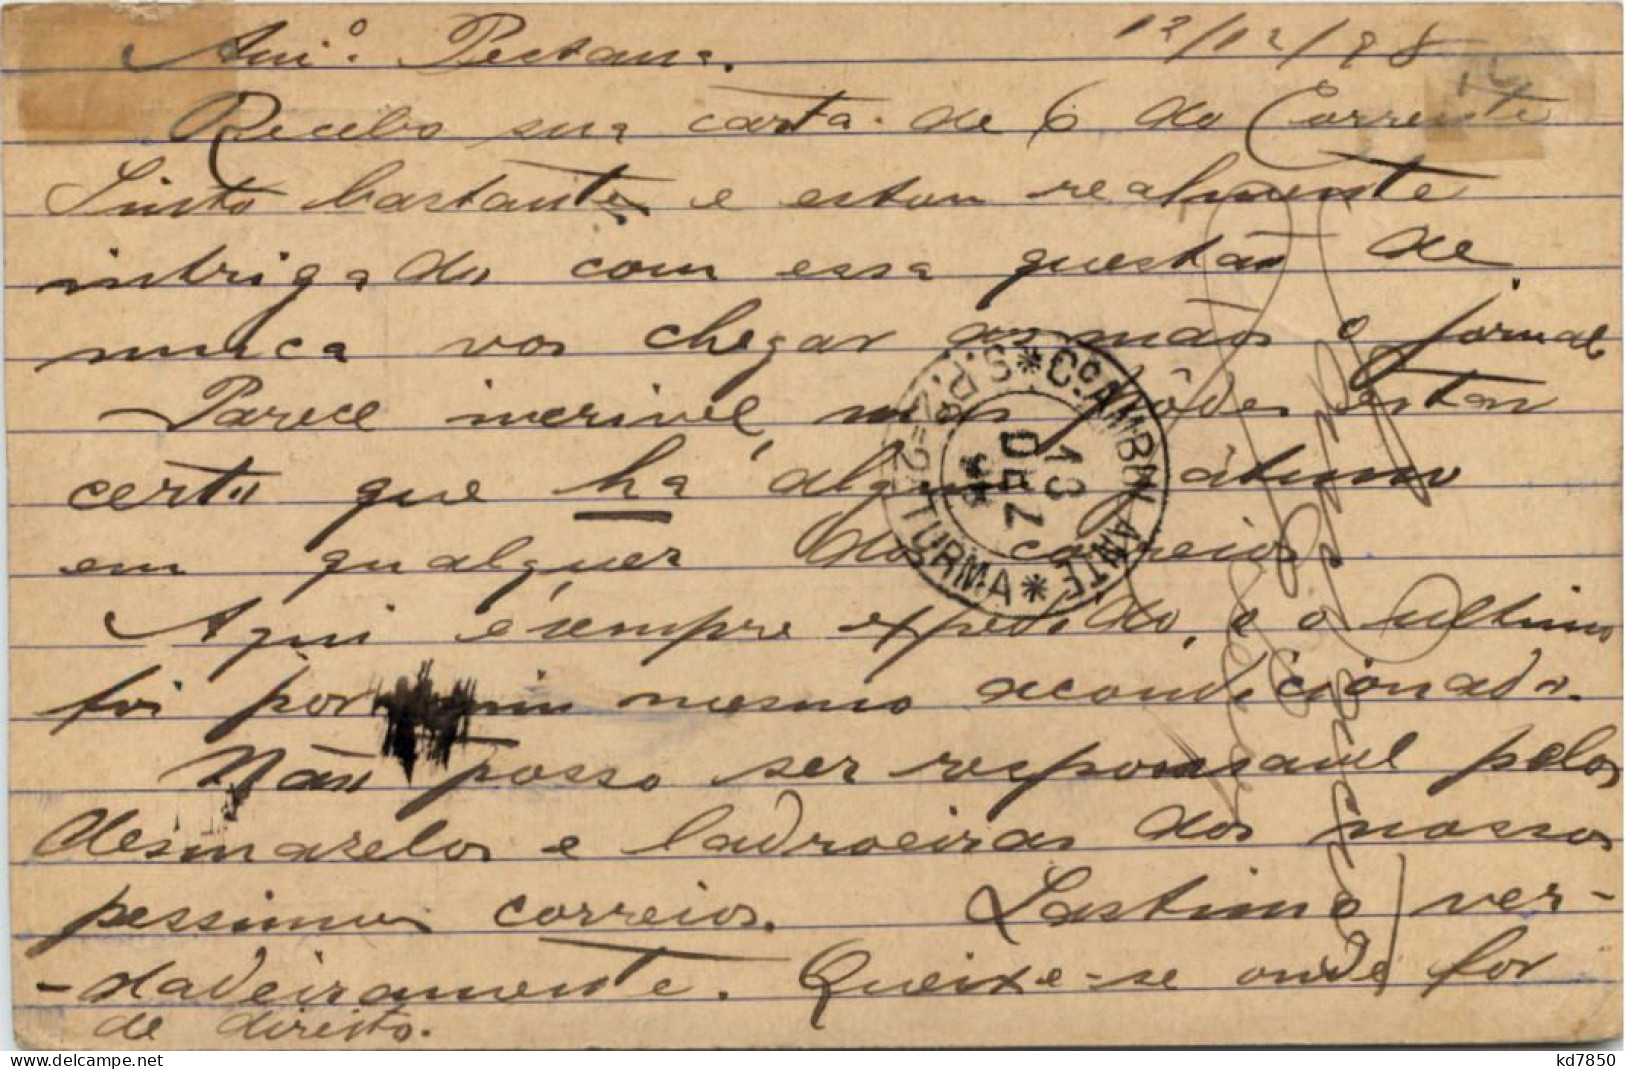 Brazil - Ganzsache 1898 - Other & Unclassified